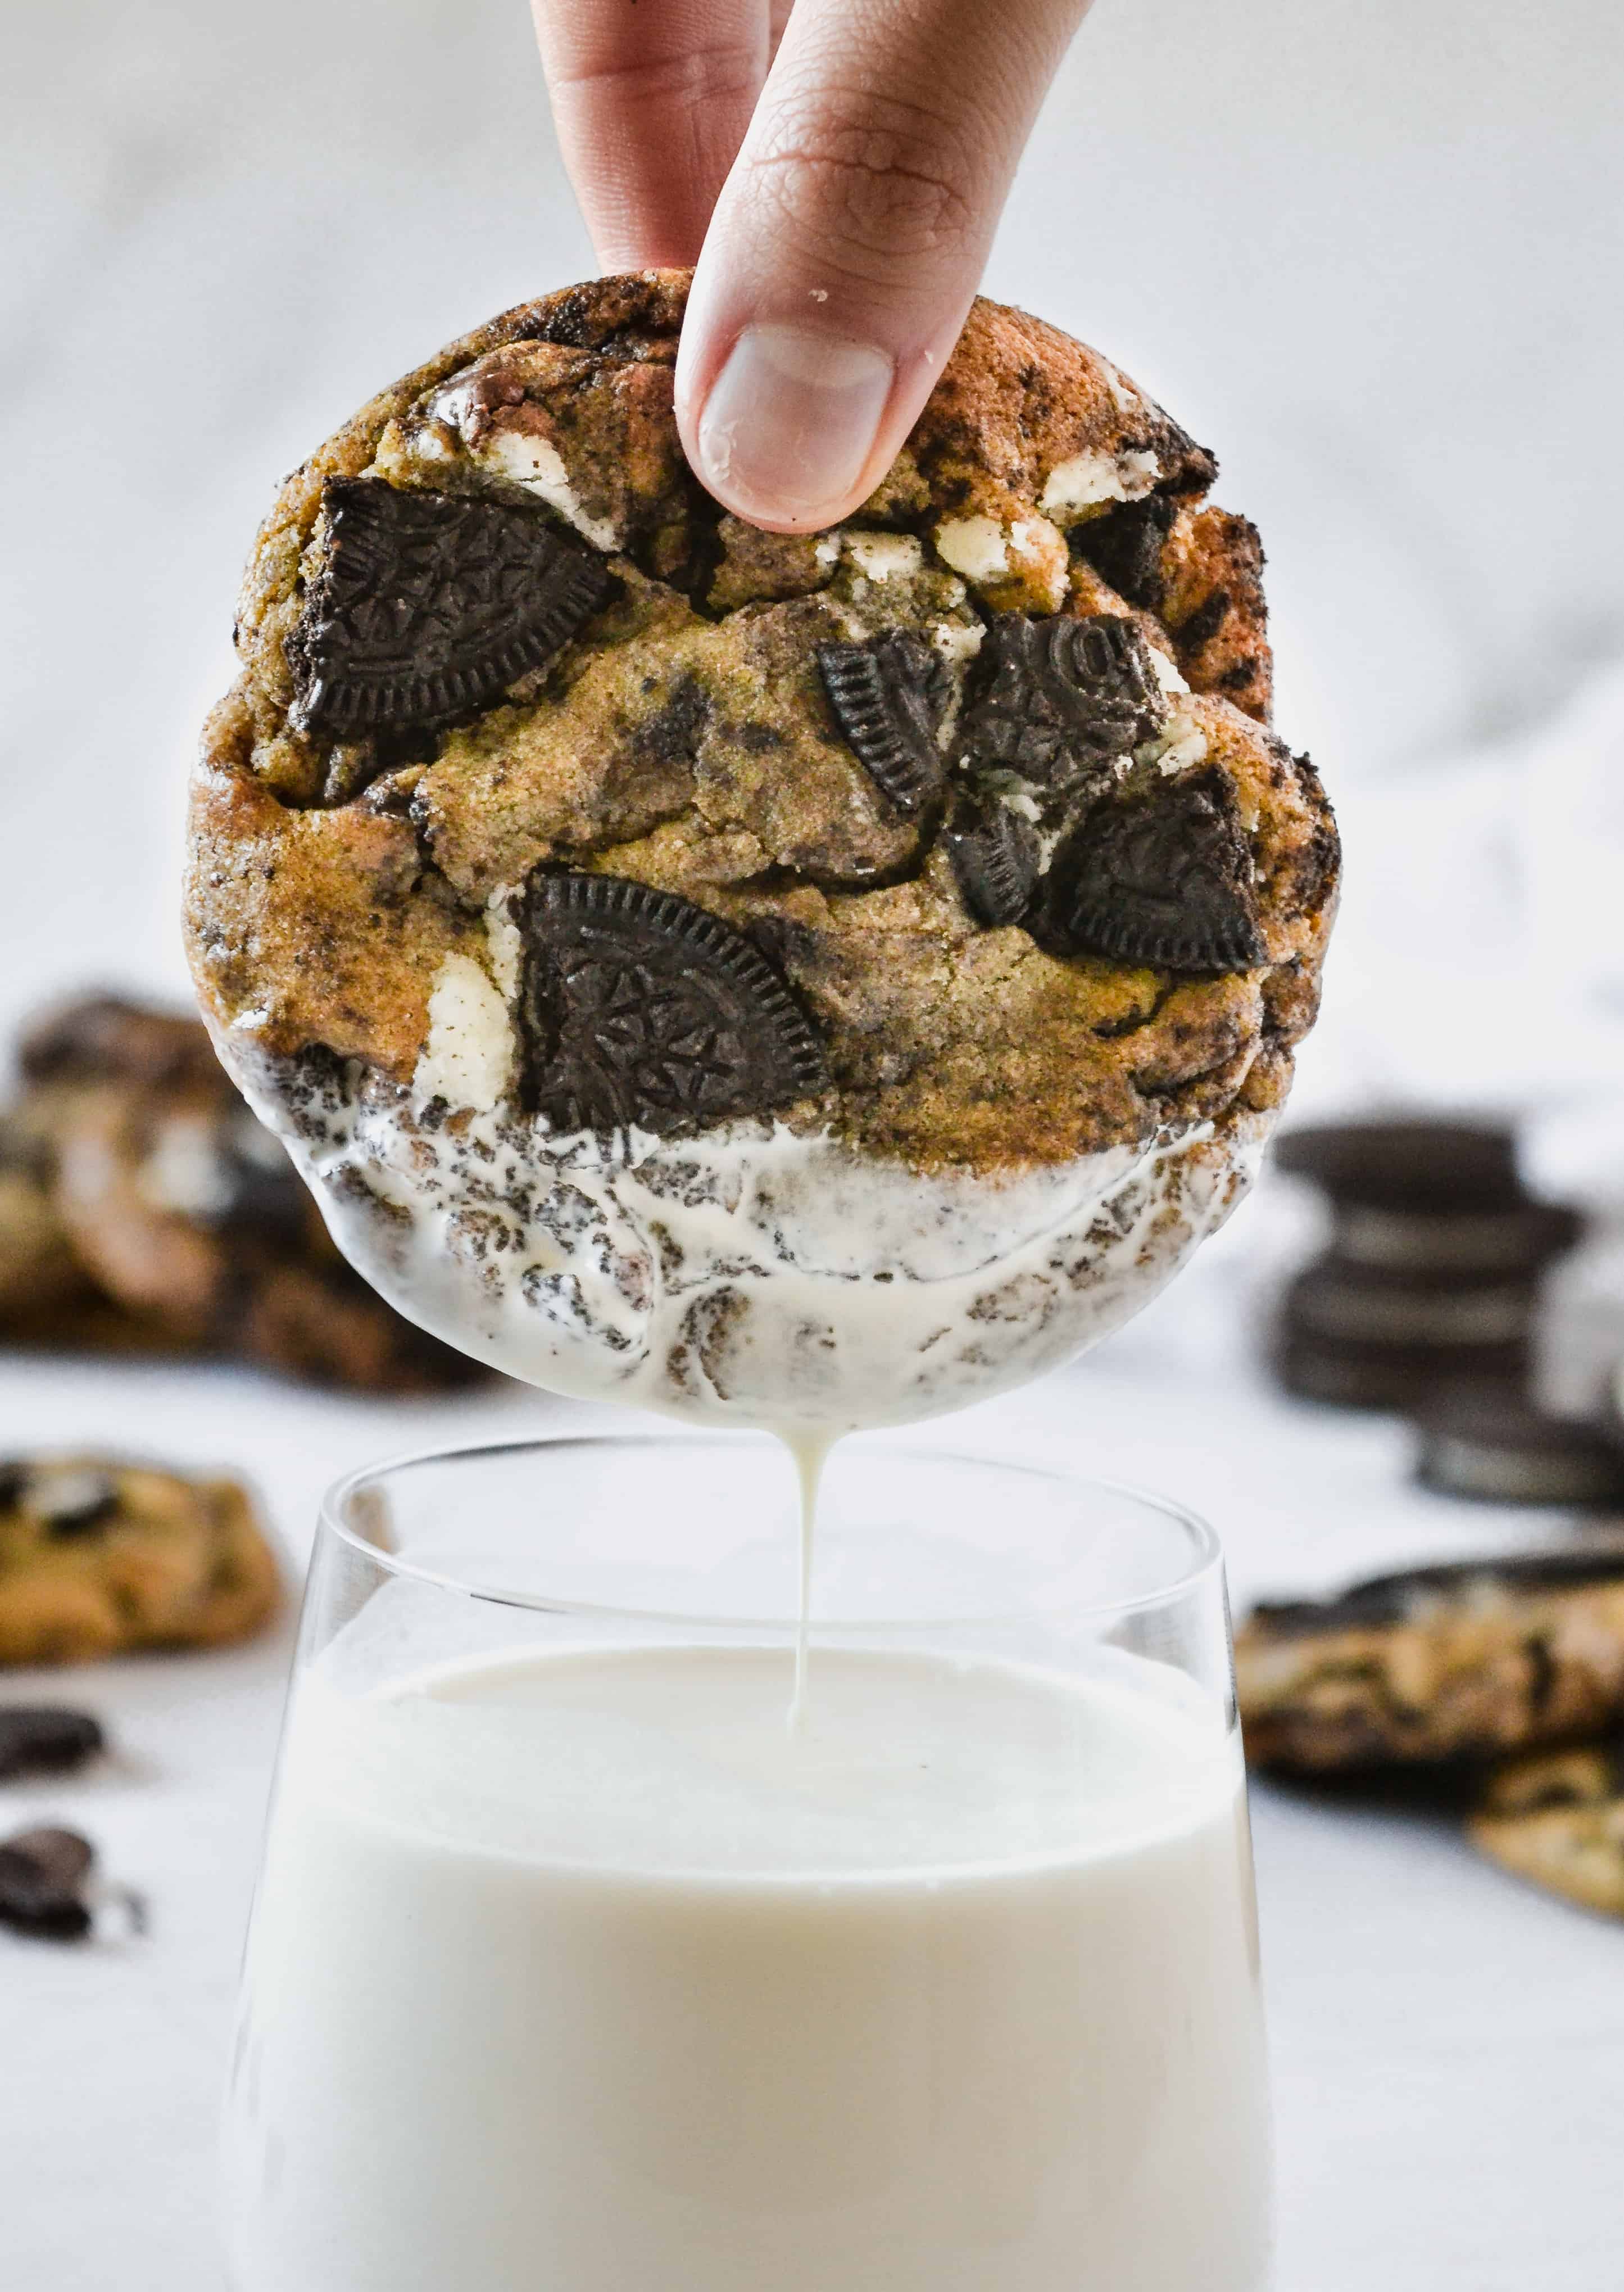 Crushed Oreo Chocolate Chip Cookies dipped in a glass of milk.